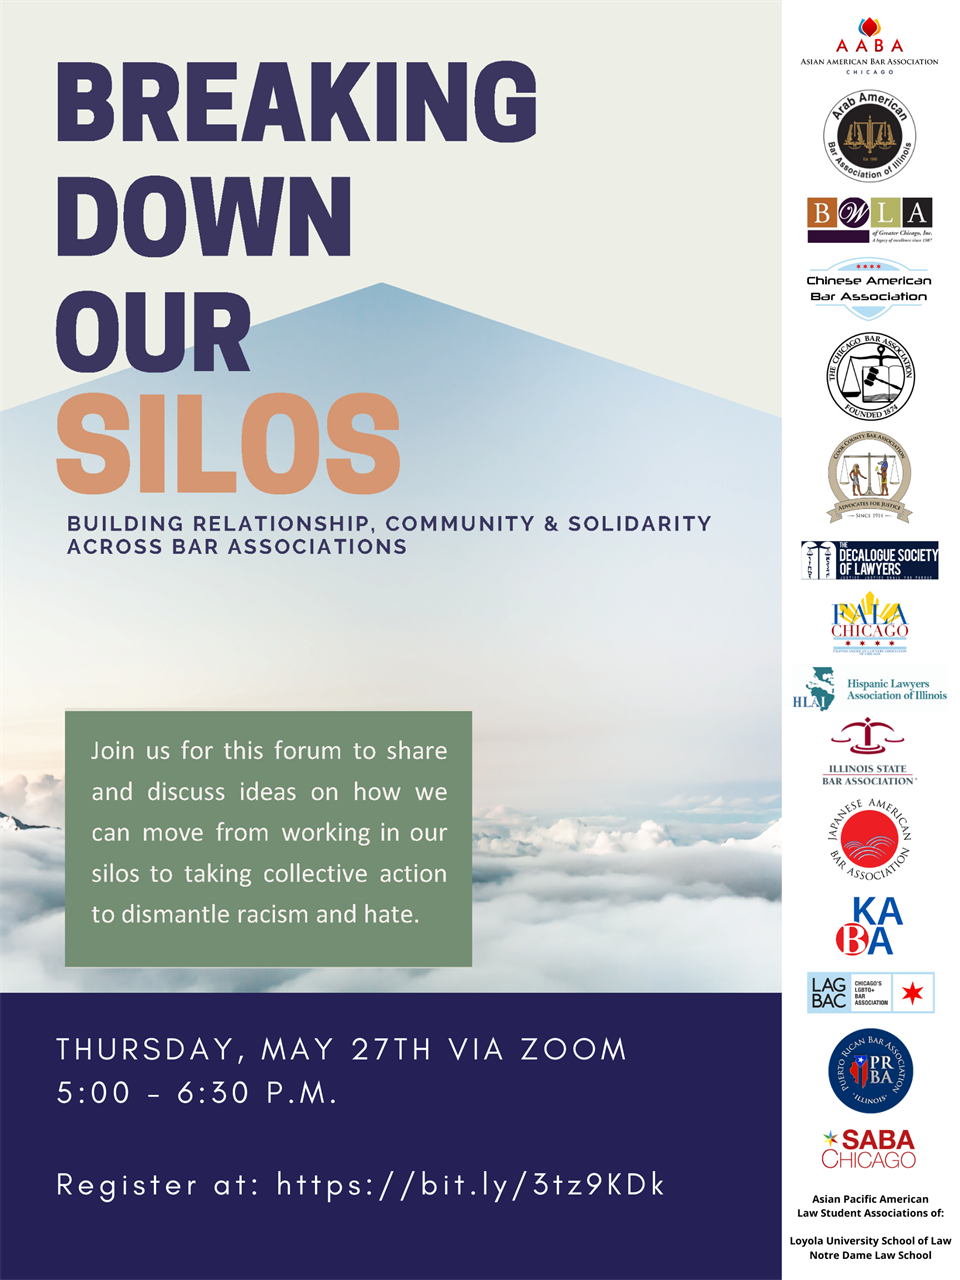 Breaking Down Our Silos: Building Relationship, Community & Solidarity Across Bar Associations